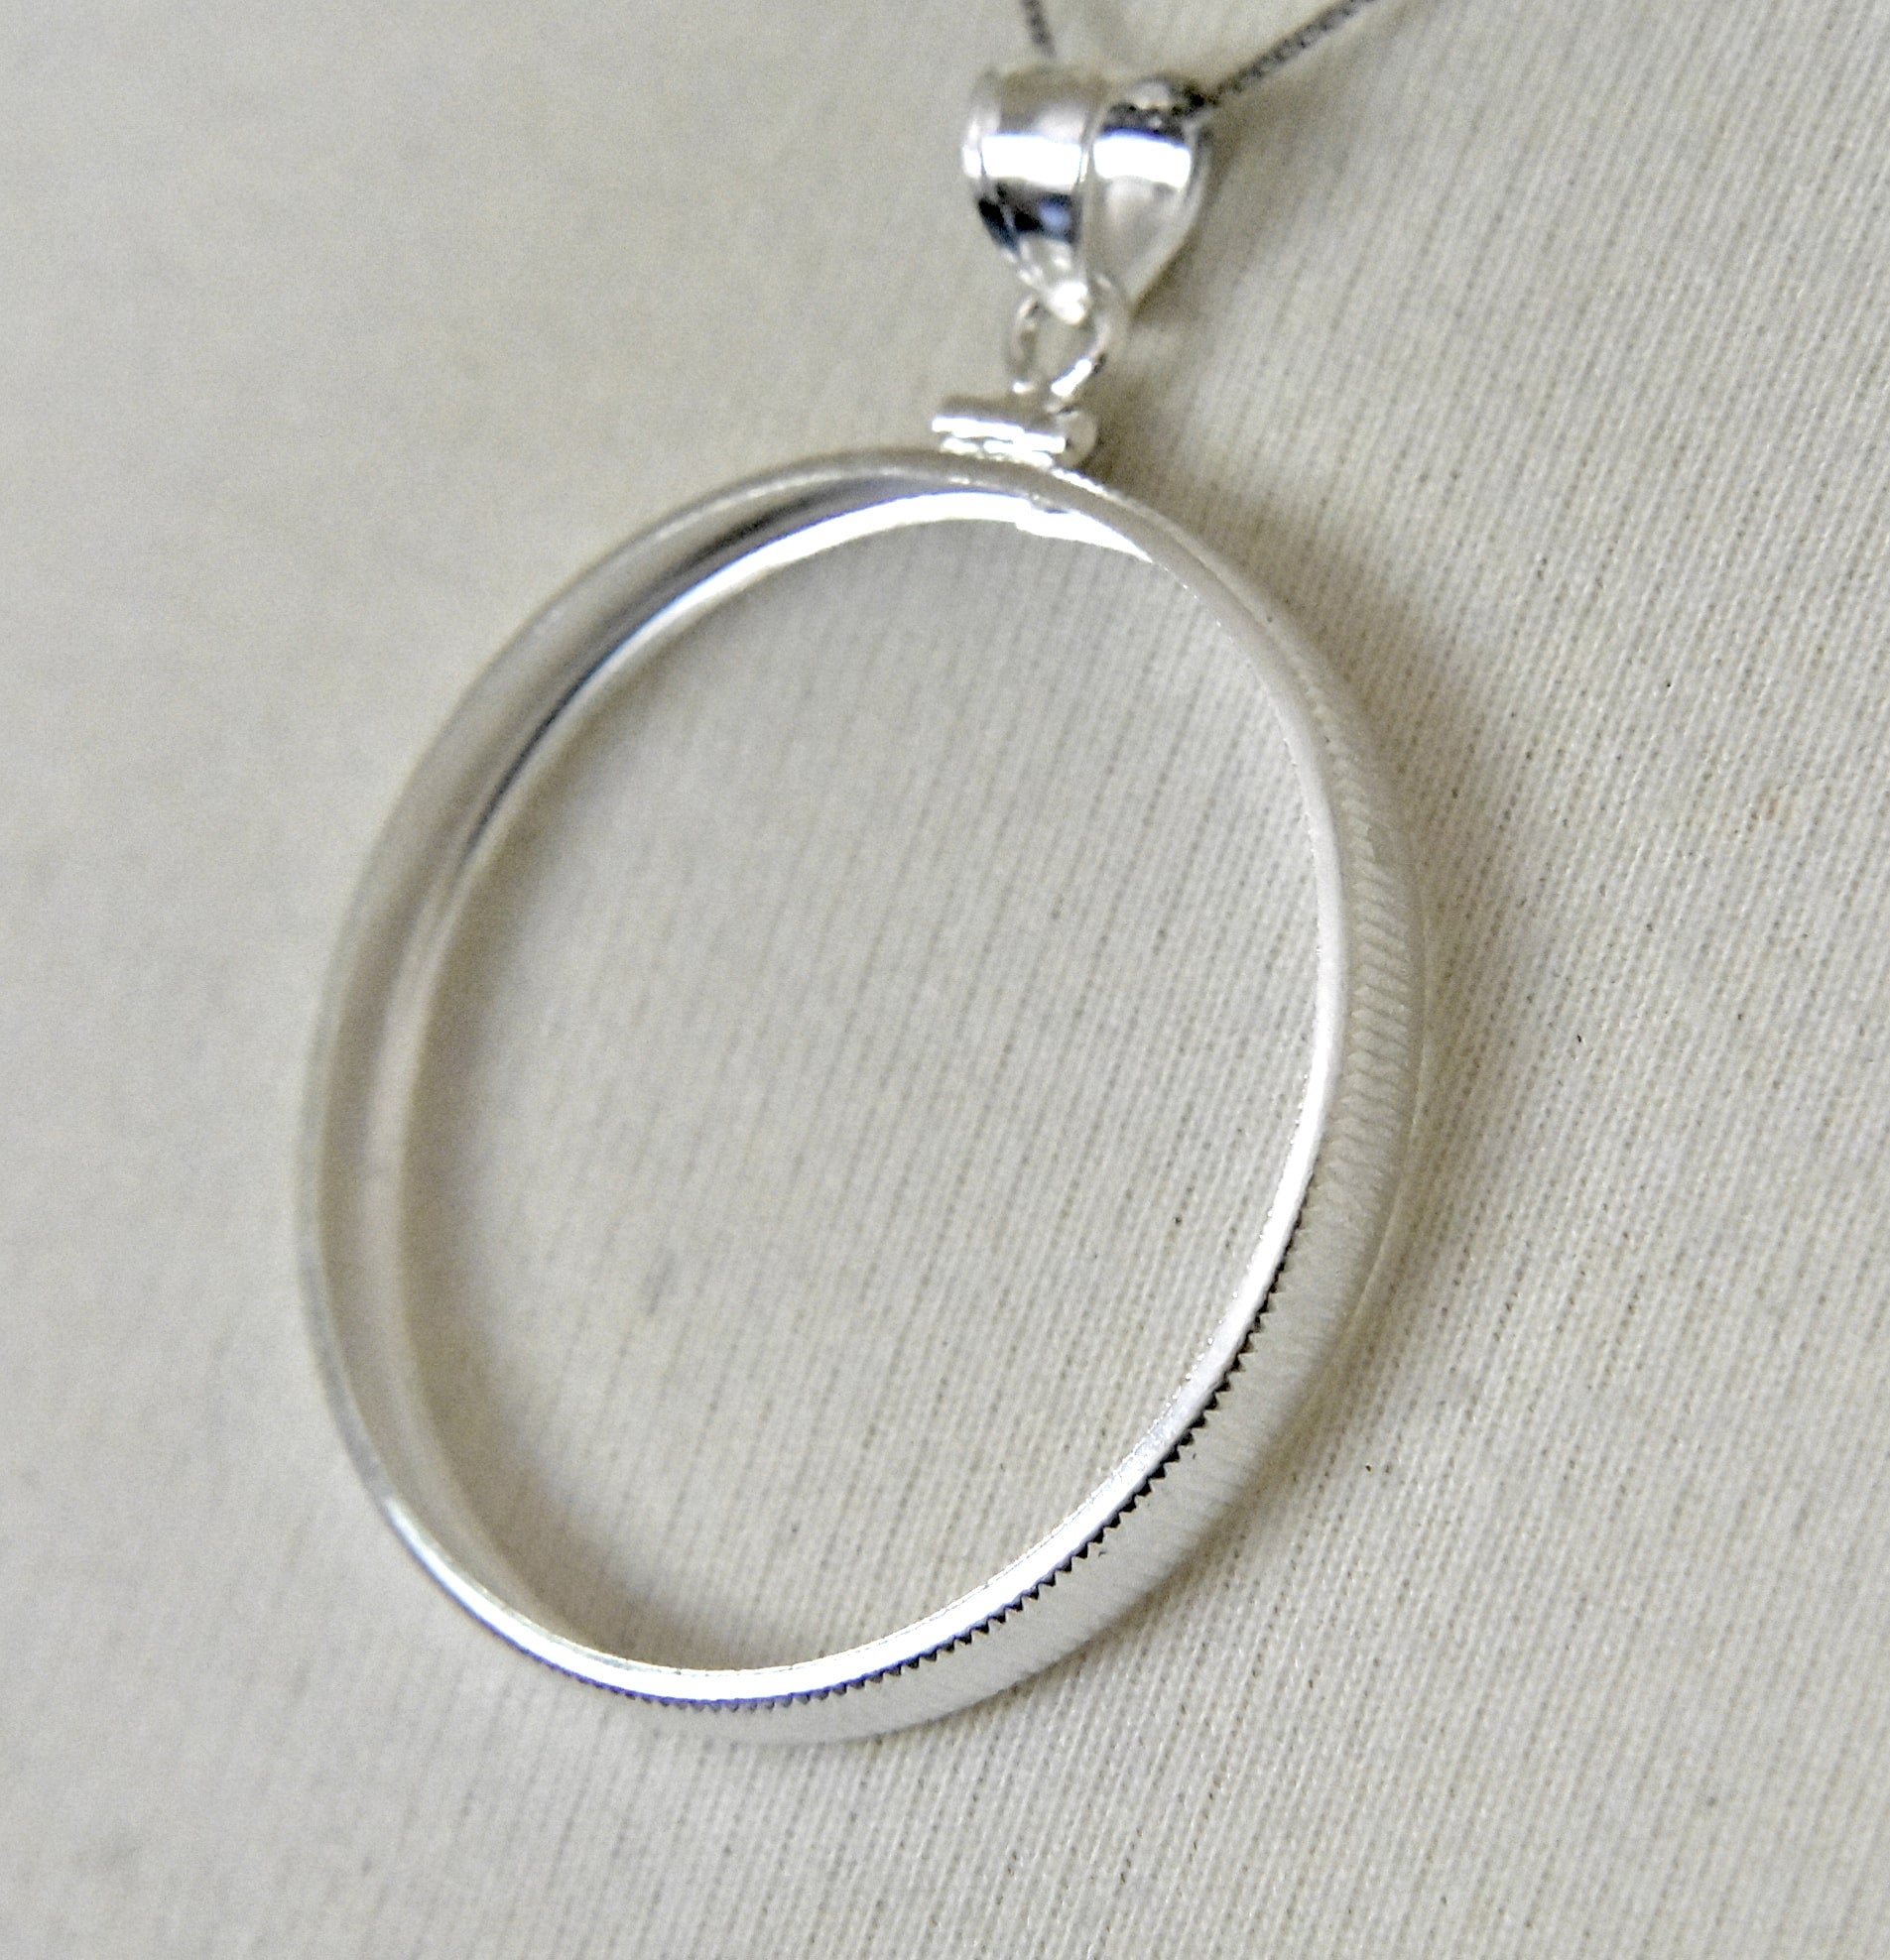 Sterling Silver Coin Holder Bezel Pendant Charm Screw Top Holds 38.2mm x 3.1mm Coins